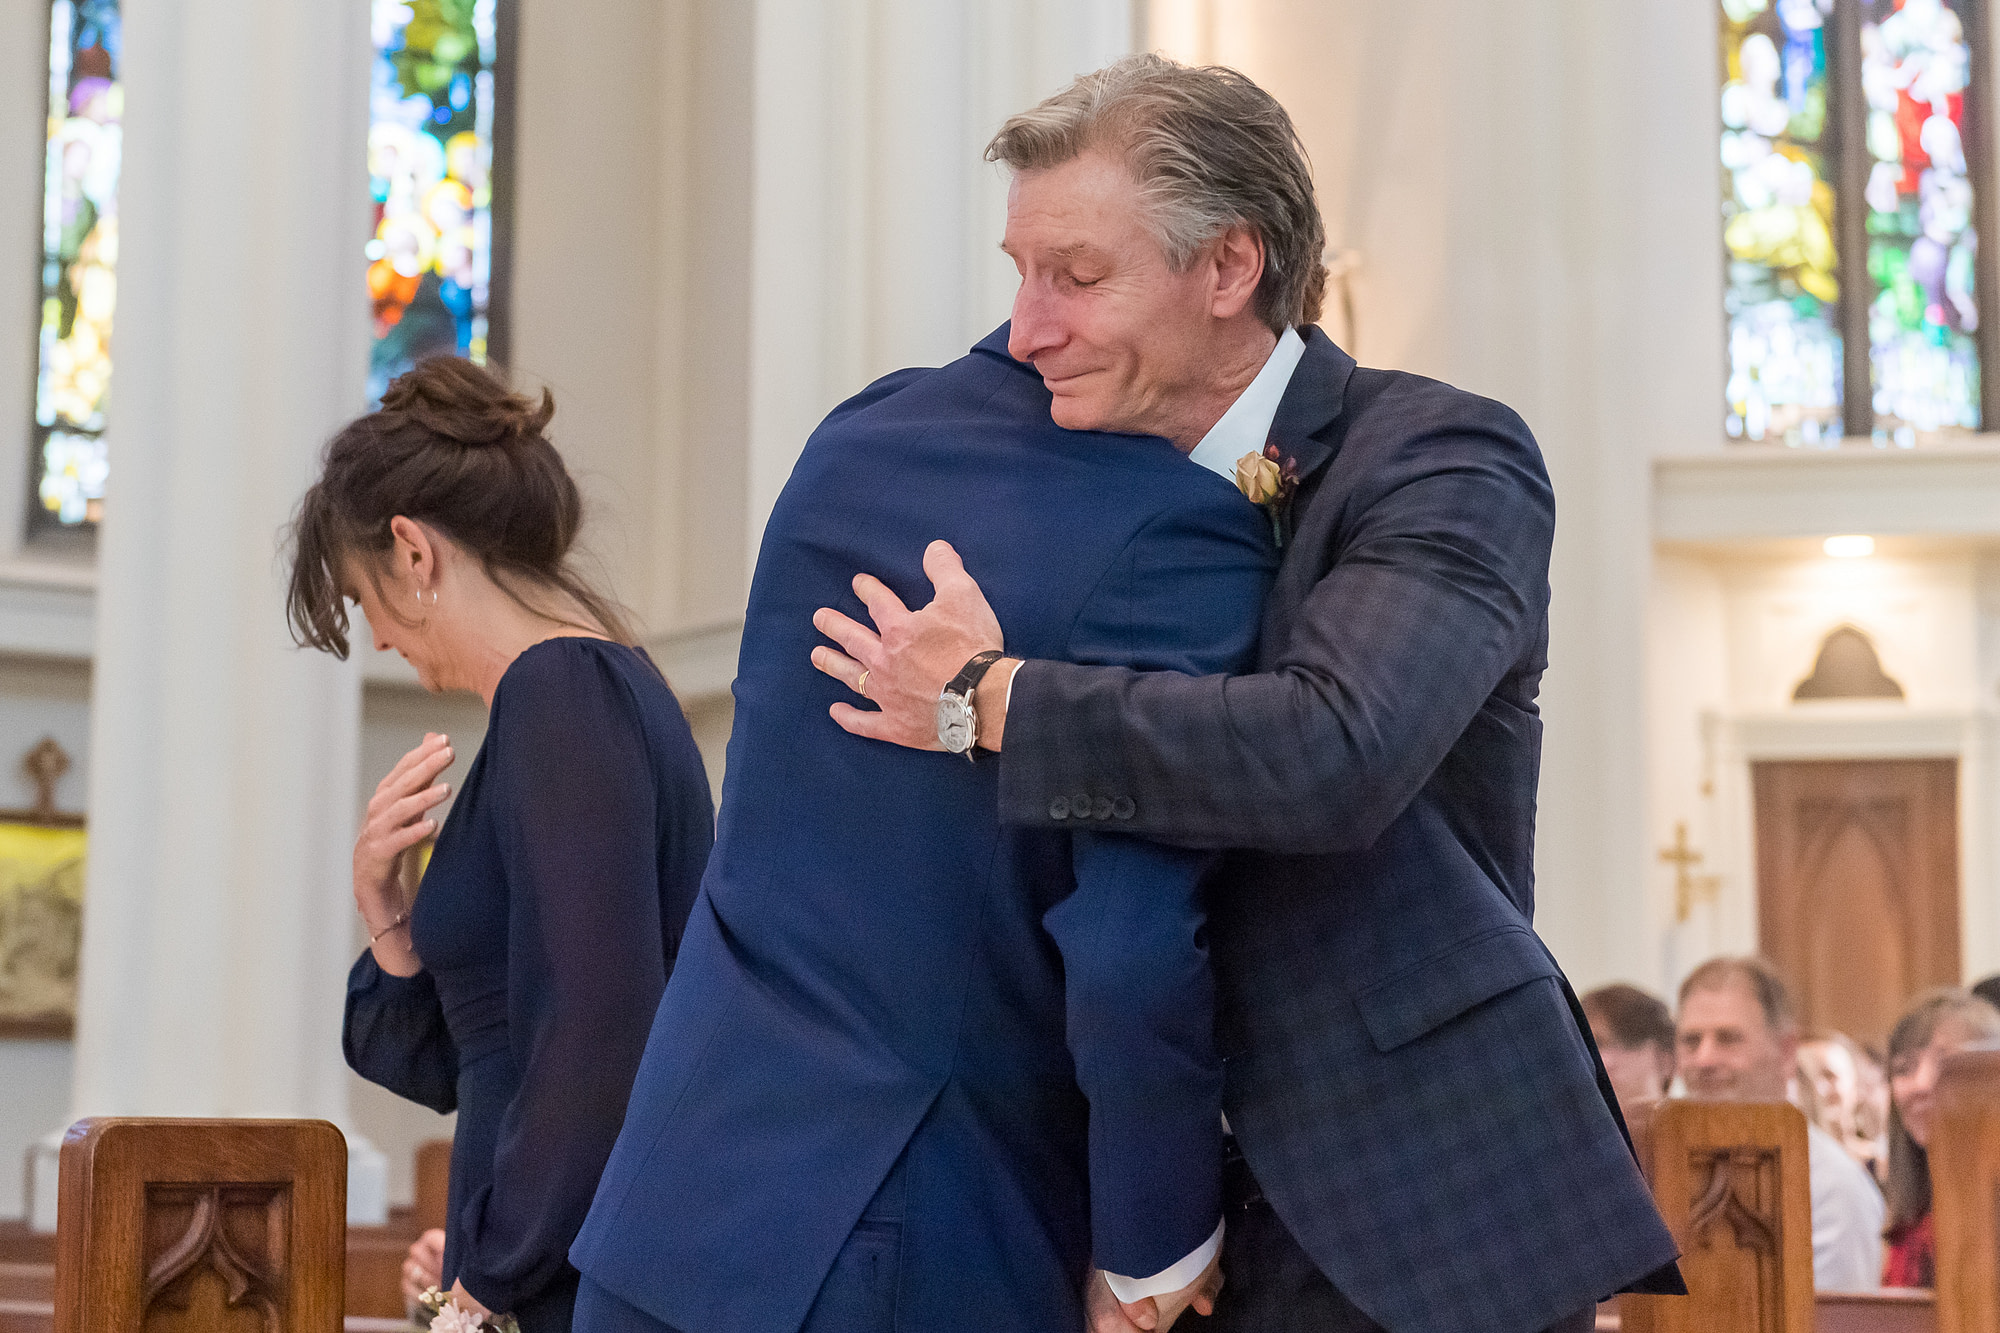 The father of the groom hugs him during his Cathedral Basilica of the Immaculate Conception wedding in Denver, Colorado.